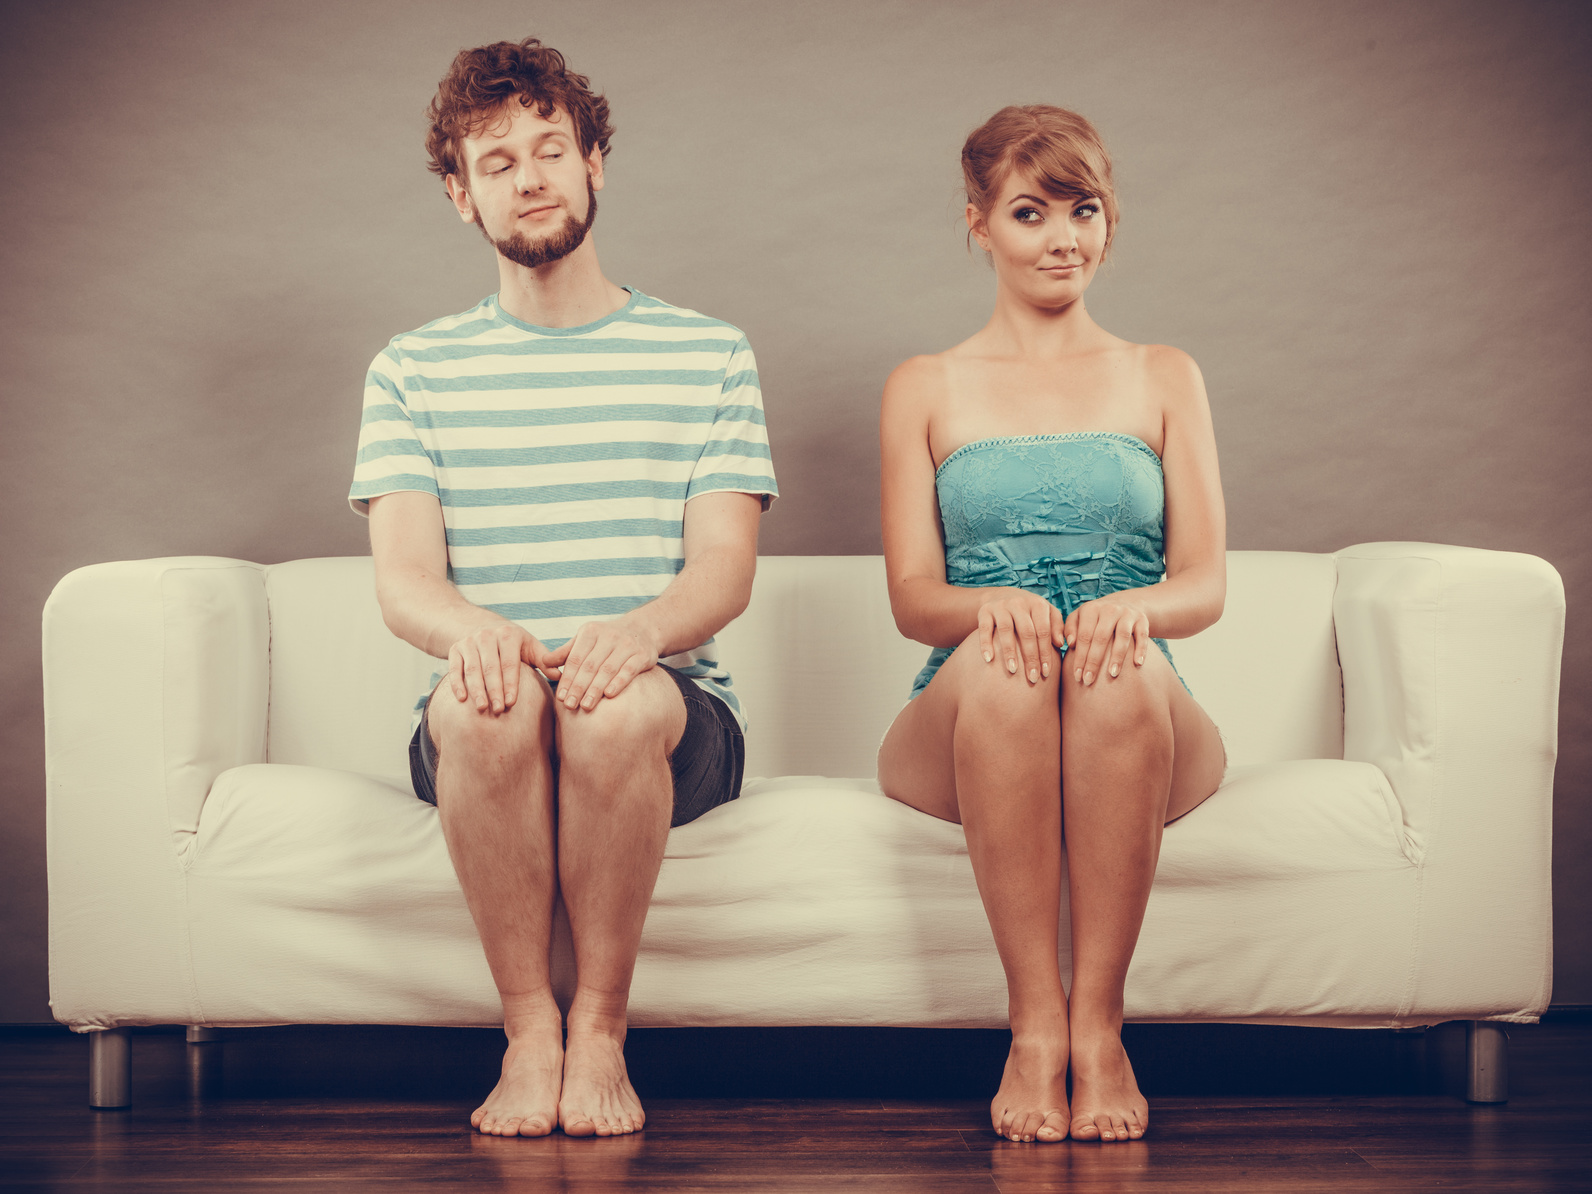 Shy woman and man sitting close to each other on couch.